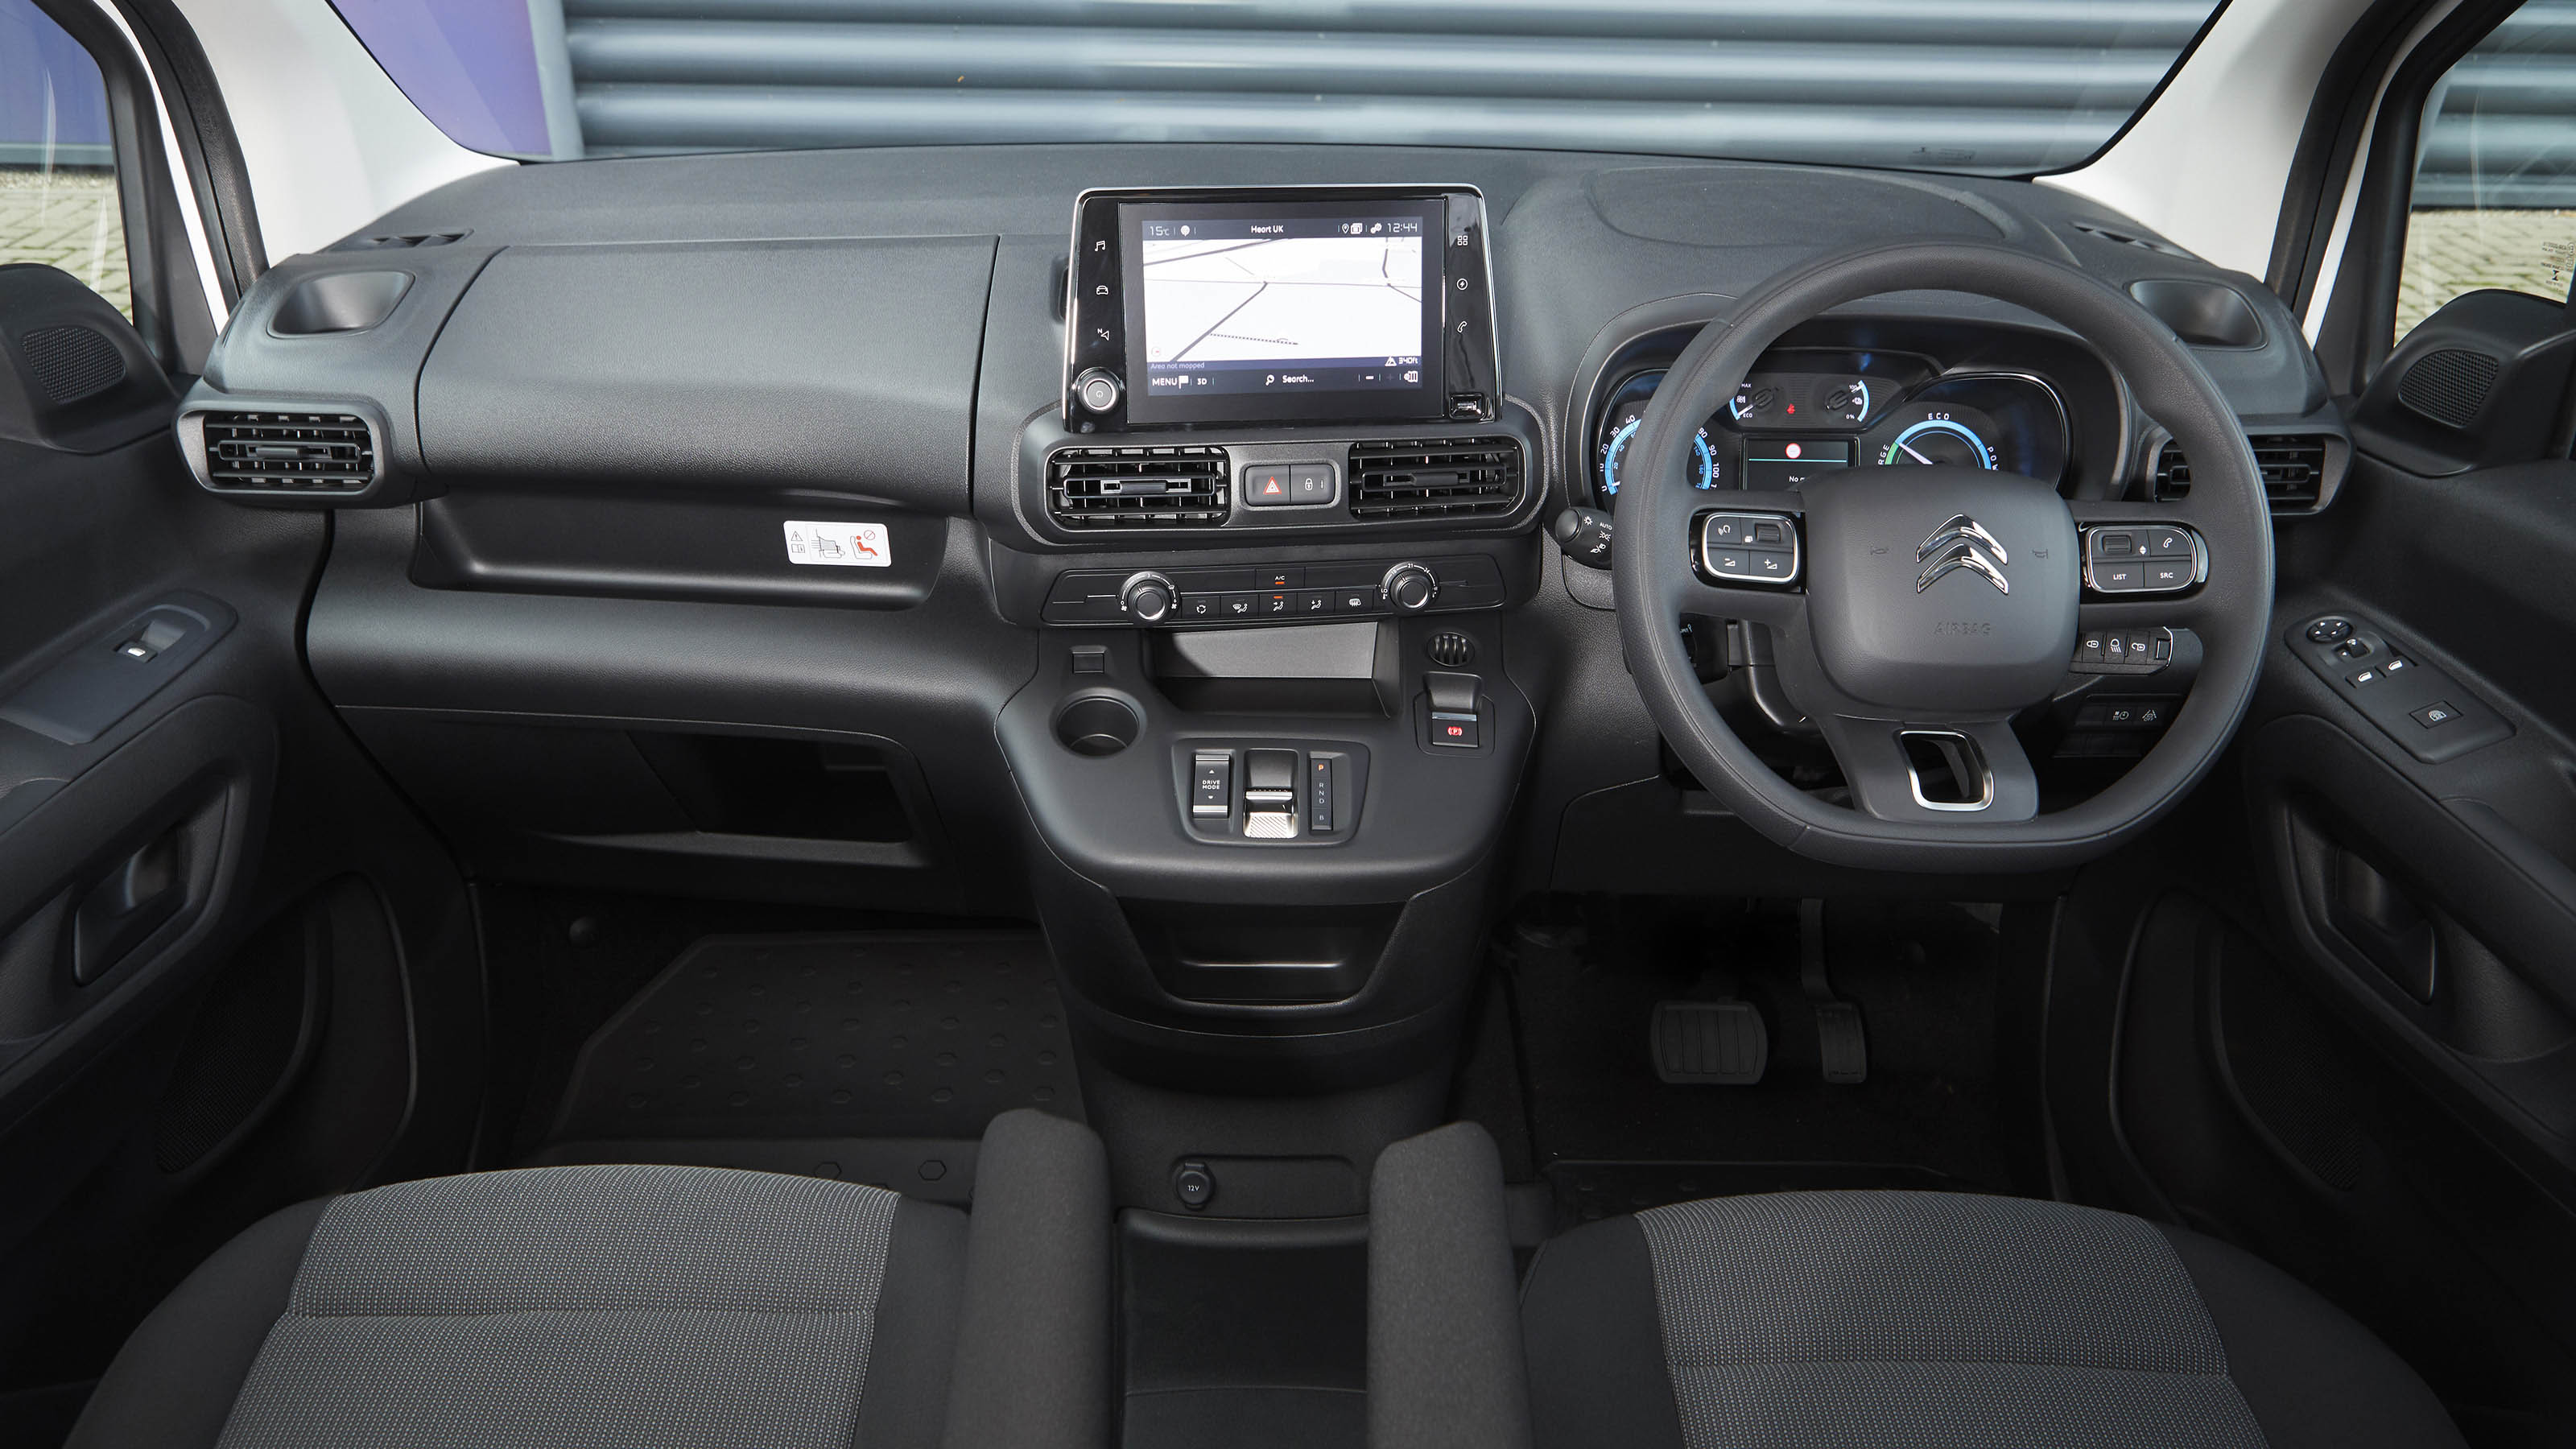 New 2024 Citroen e-Berlingo is official with 20% more range, redesigned  interior - ArenaEV